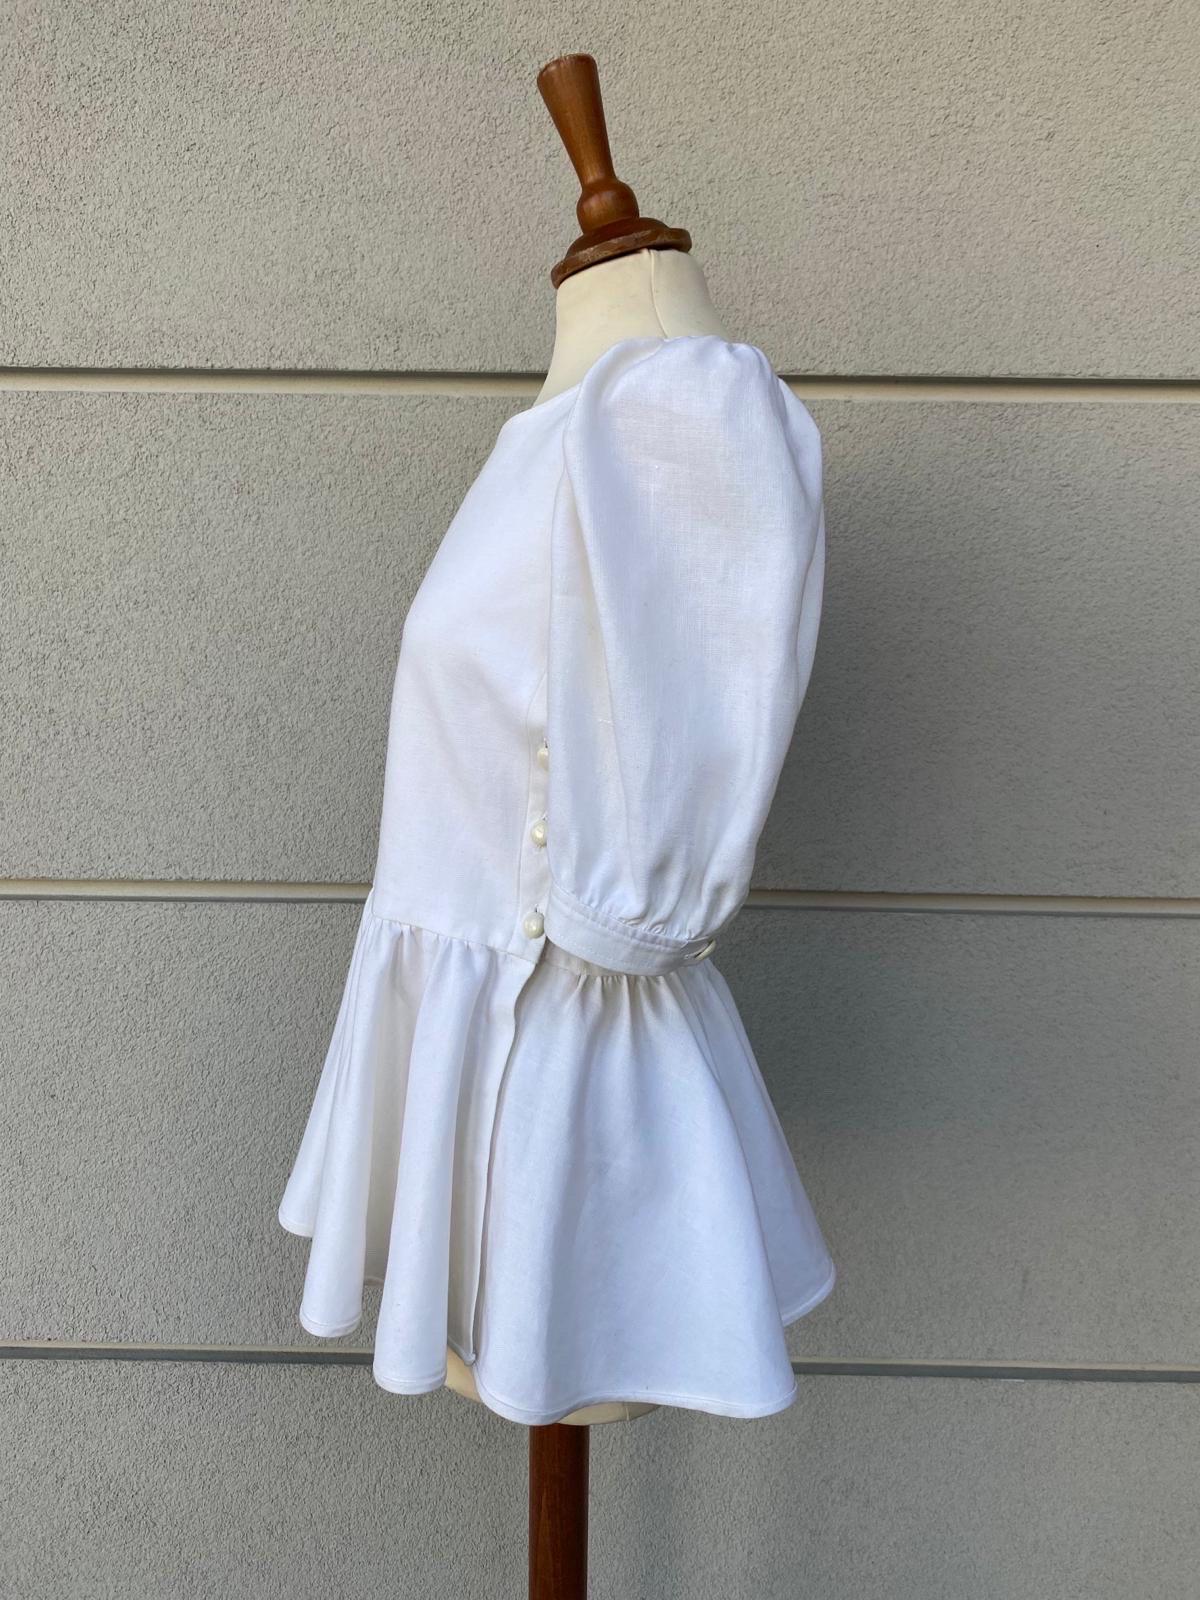 Valentino Boutique blouse.
In linen, cream colour. Size 10 but fits an Italian 38/40.
The buttons on one side are ornamental while on the other they are for closure.
Measurements:
shoulders 34 cm
bust 41 cm
waist 36 cm
length 64 cm
excellent general